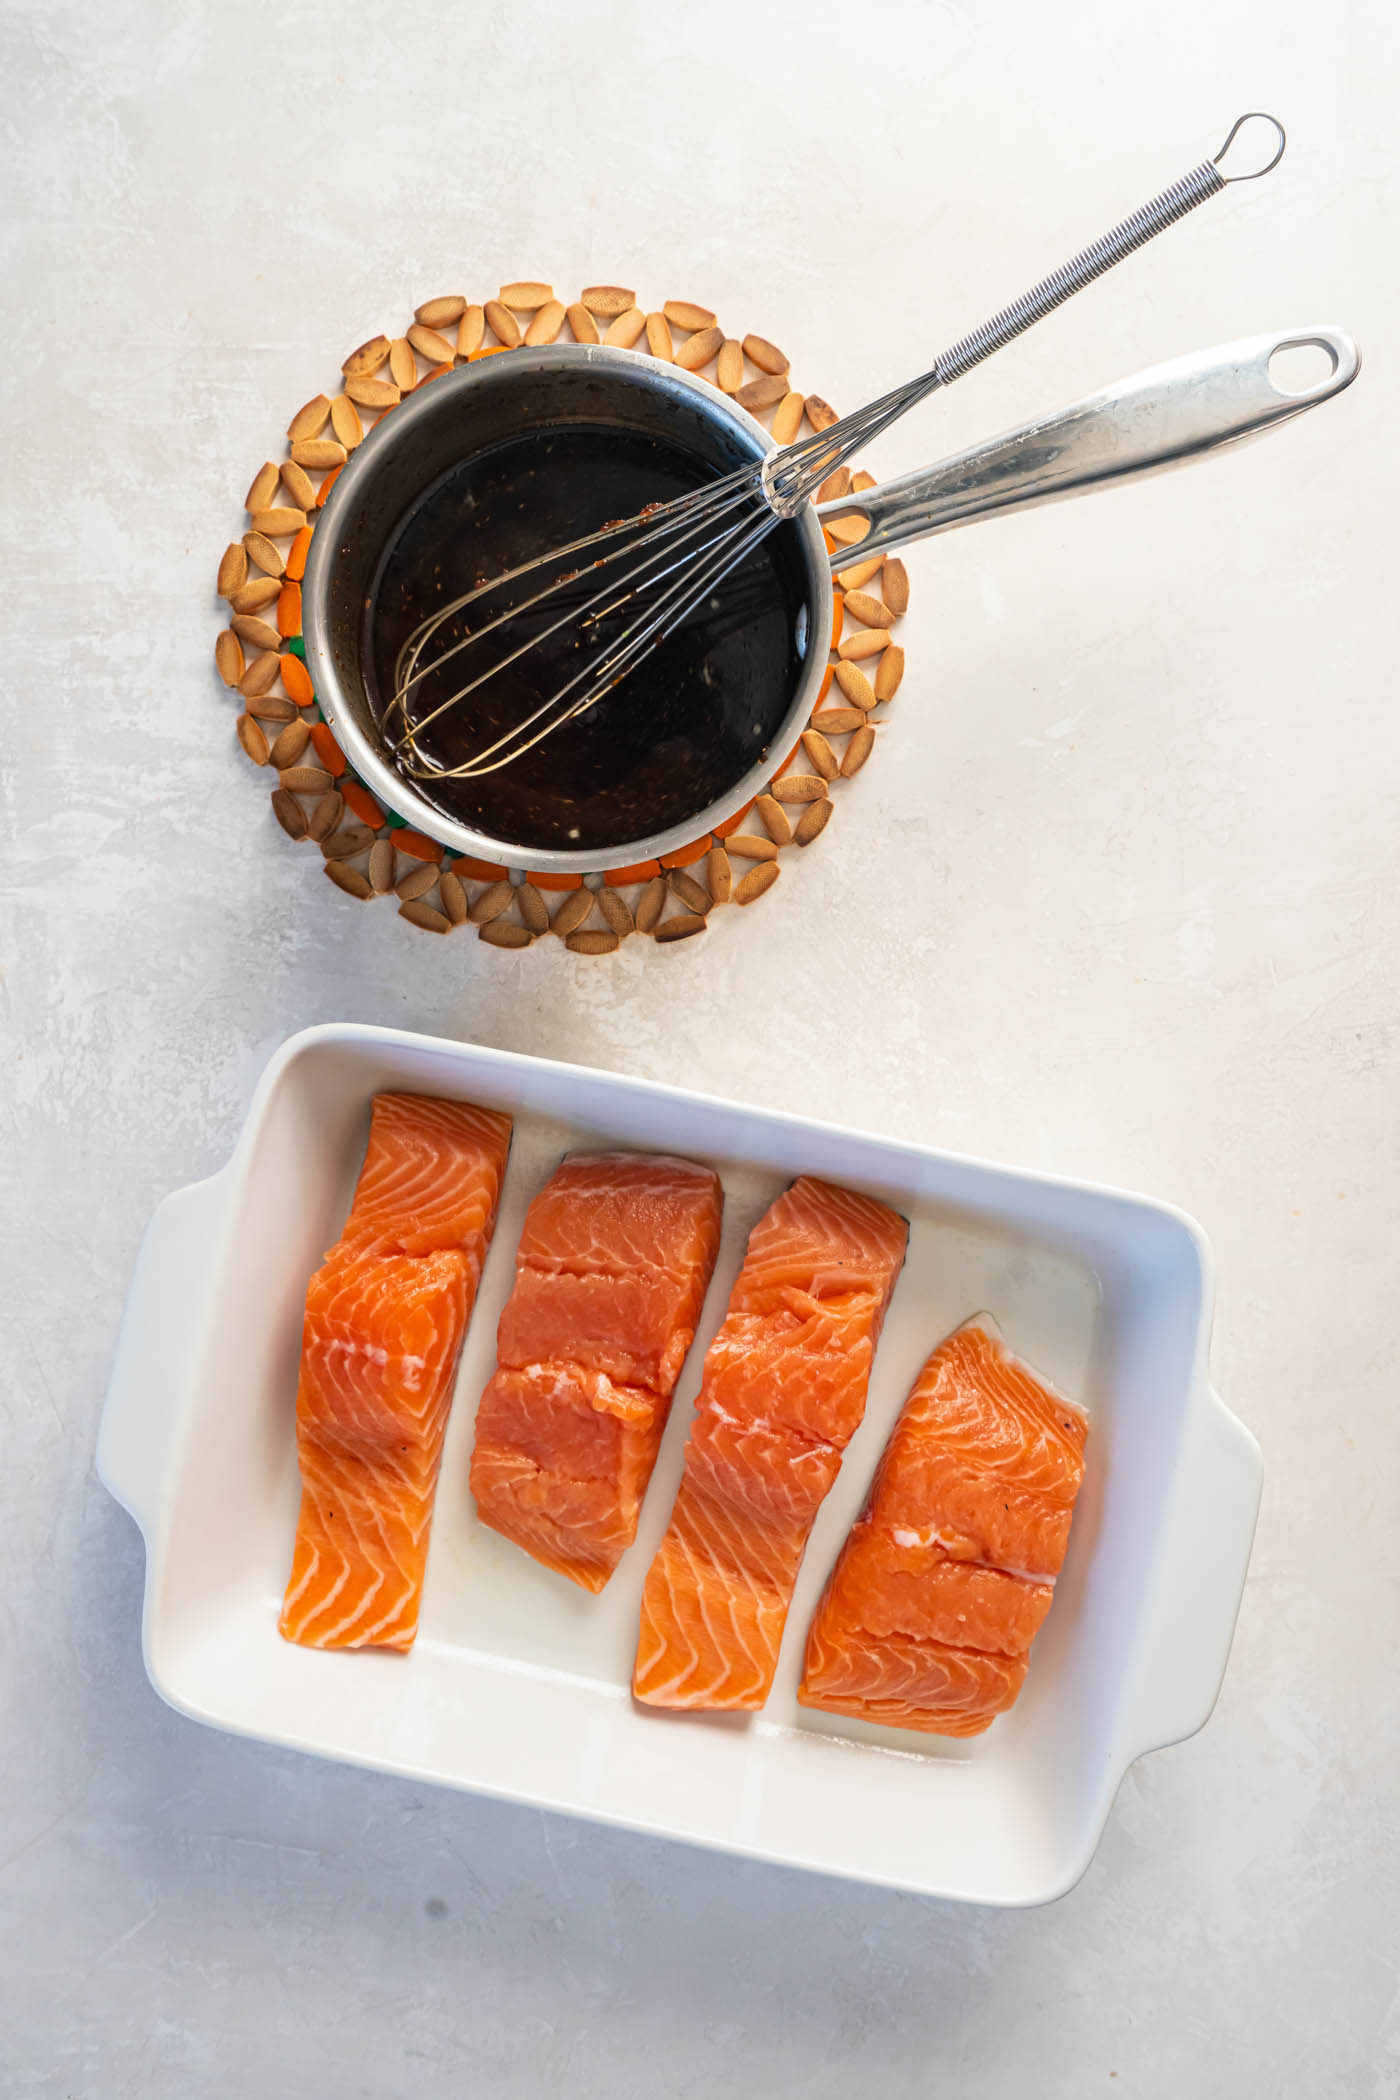 Homemade teriyaki sauce in a small saucepan with a whisk next to baking dish containing four raw salmon fillets.